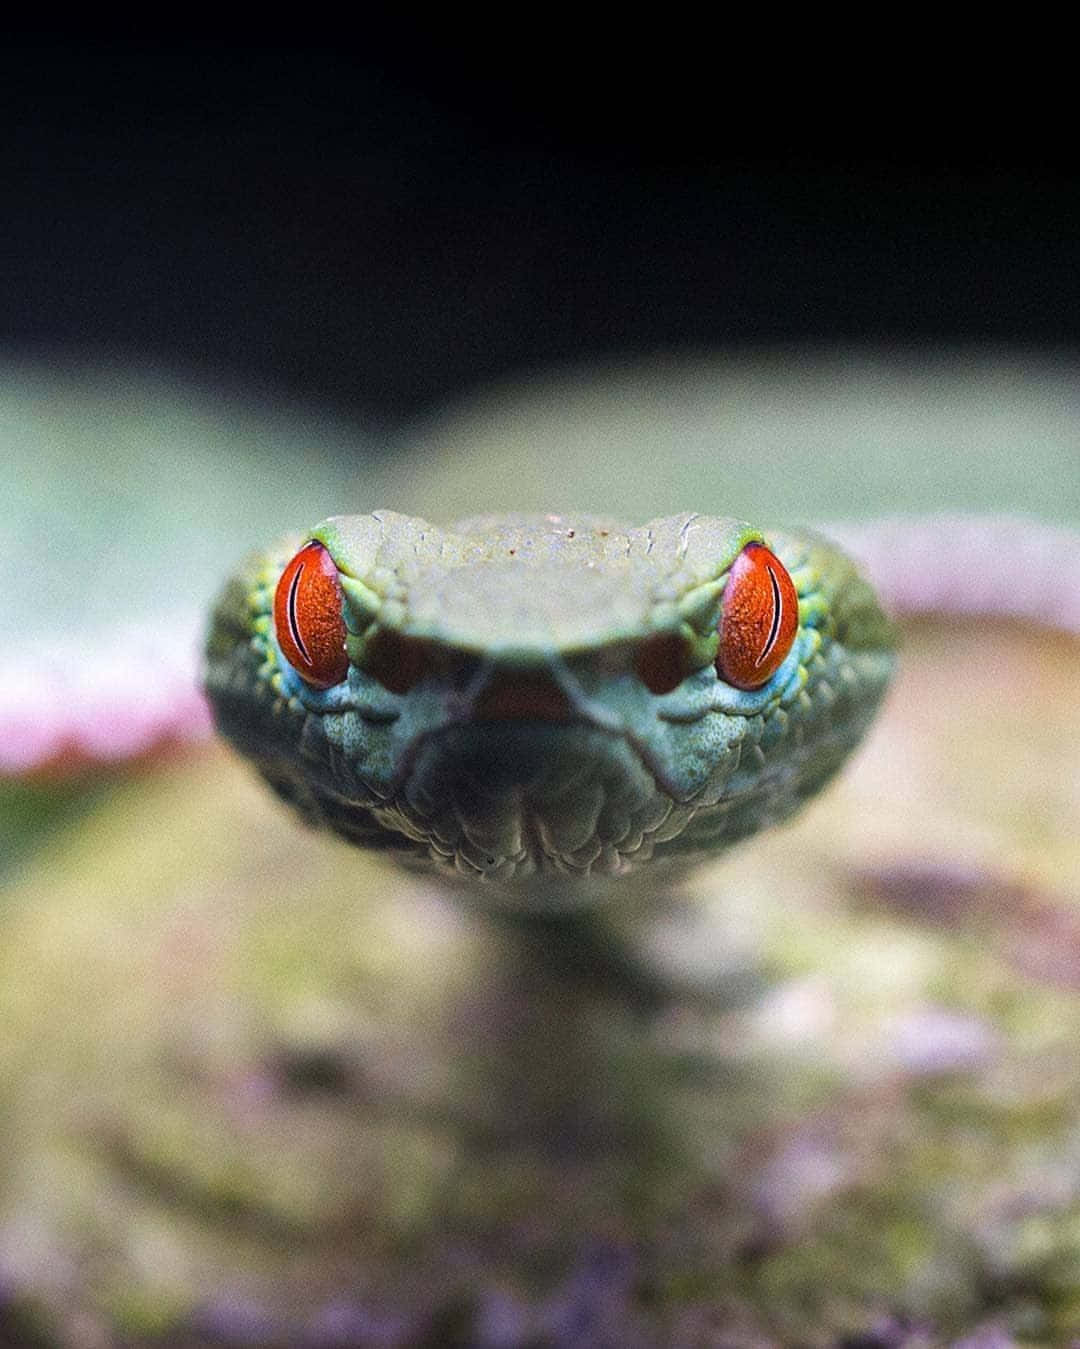 A scary and intimidating snake with its tongue out ready to strike